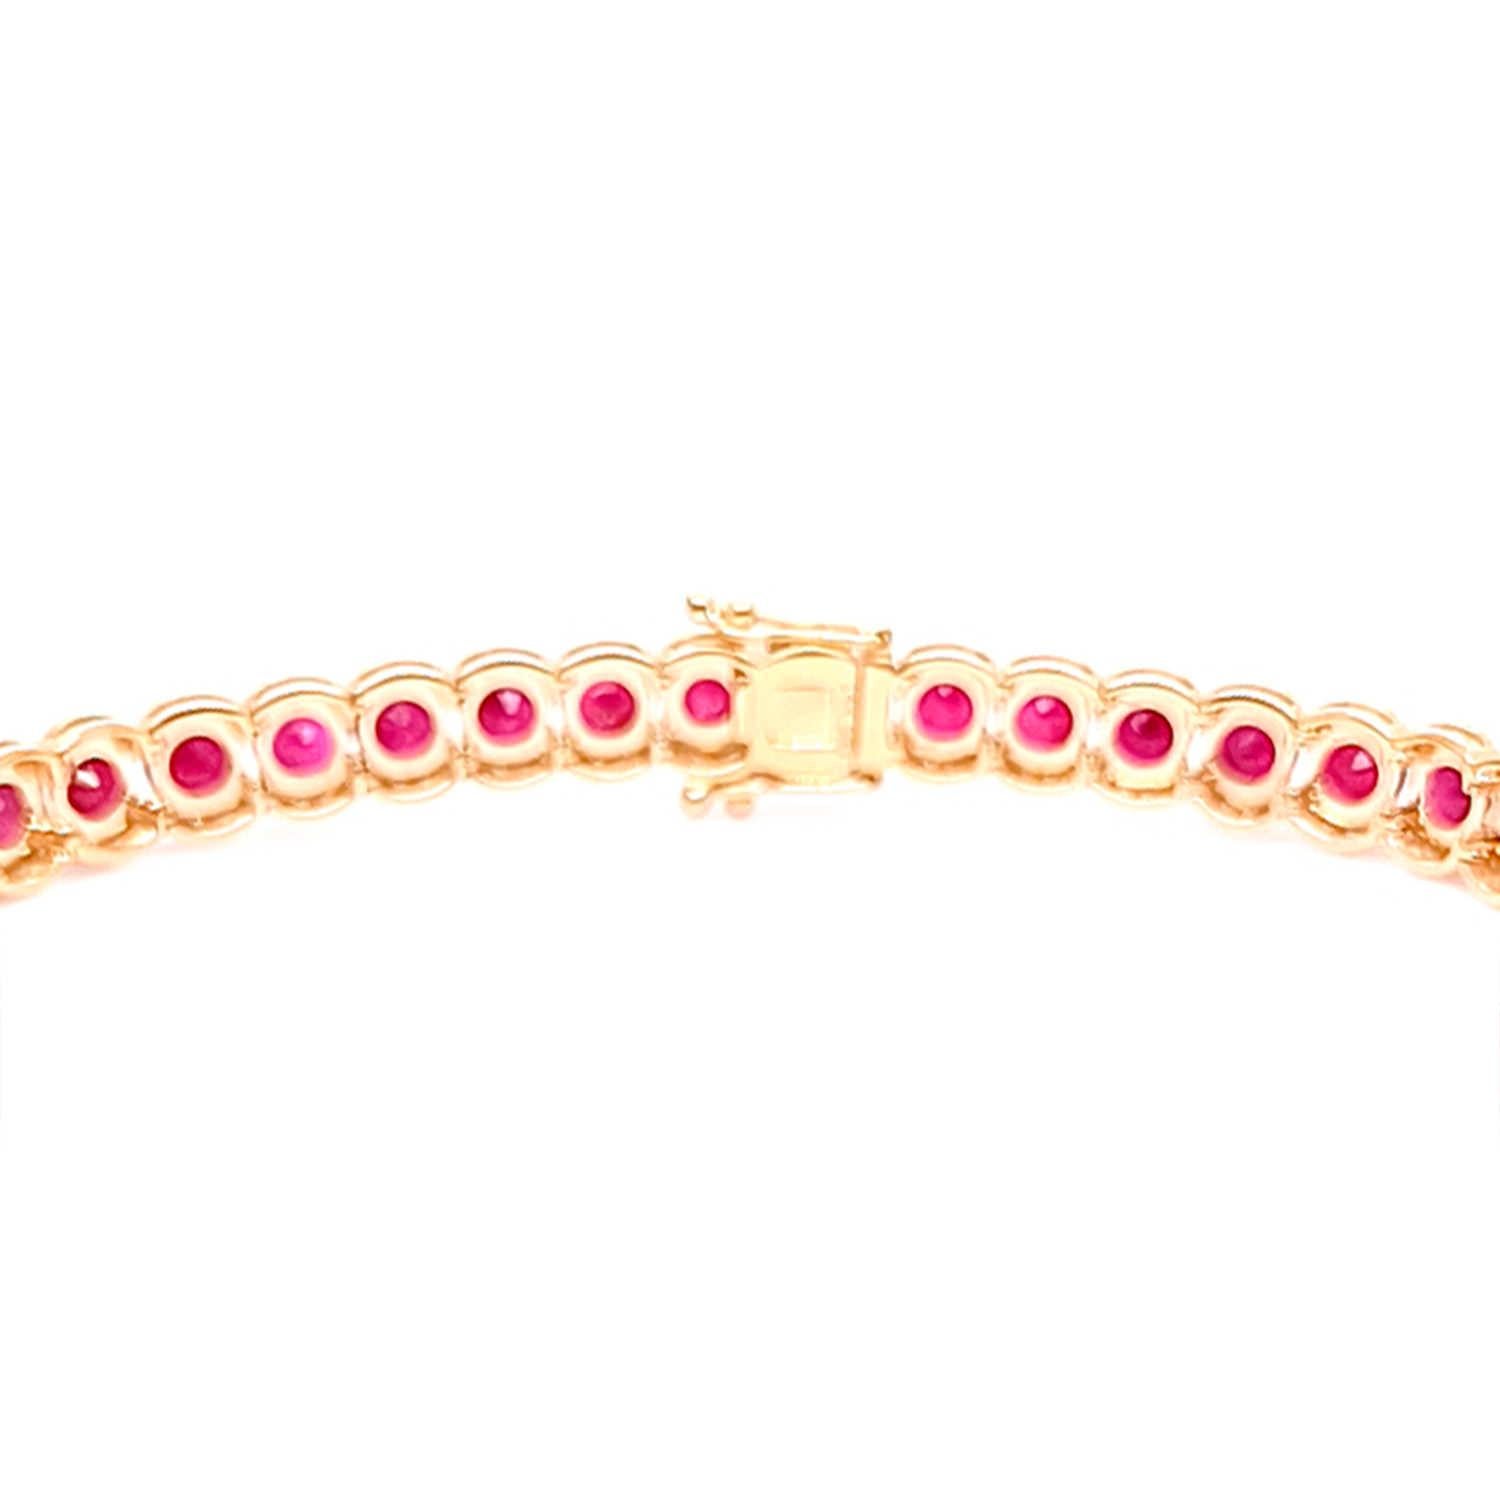 Ruby Tennis Bracelet With Diamonds 21.14 Carats 14K Yellow Gold In Excellent Condition For Sale In Laguna Niguel, CA